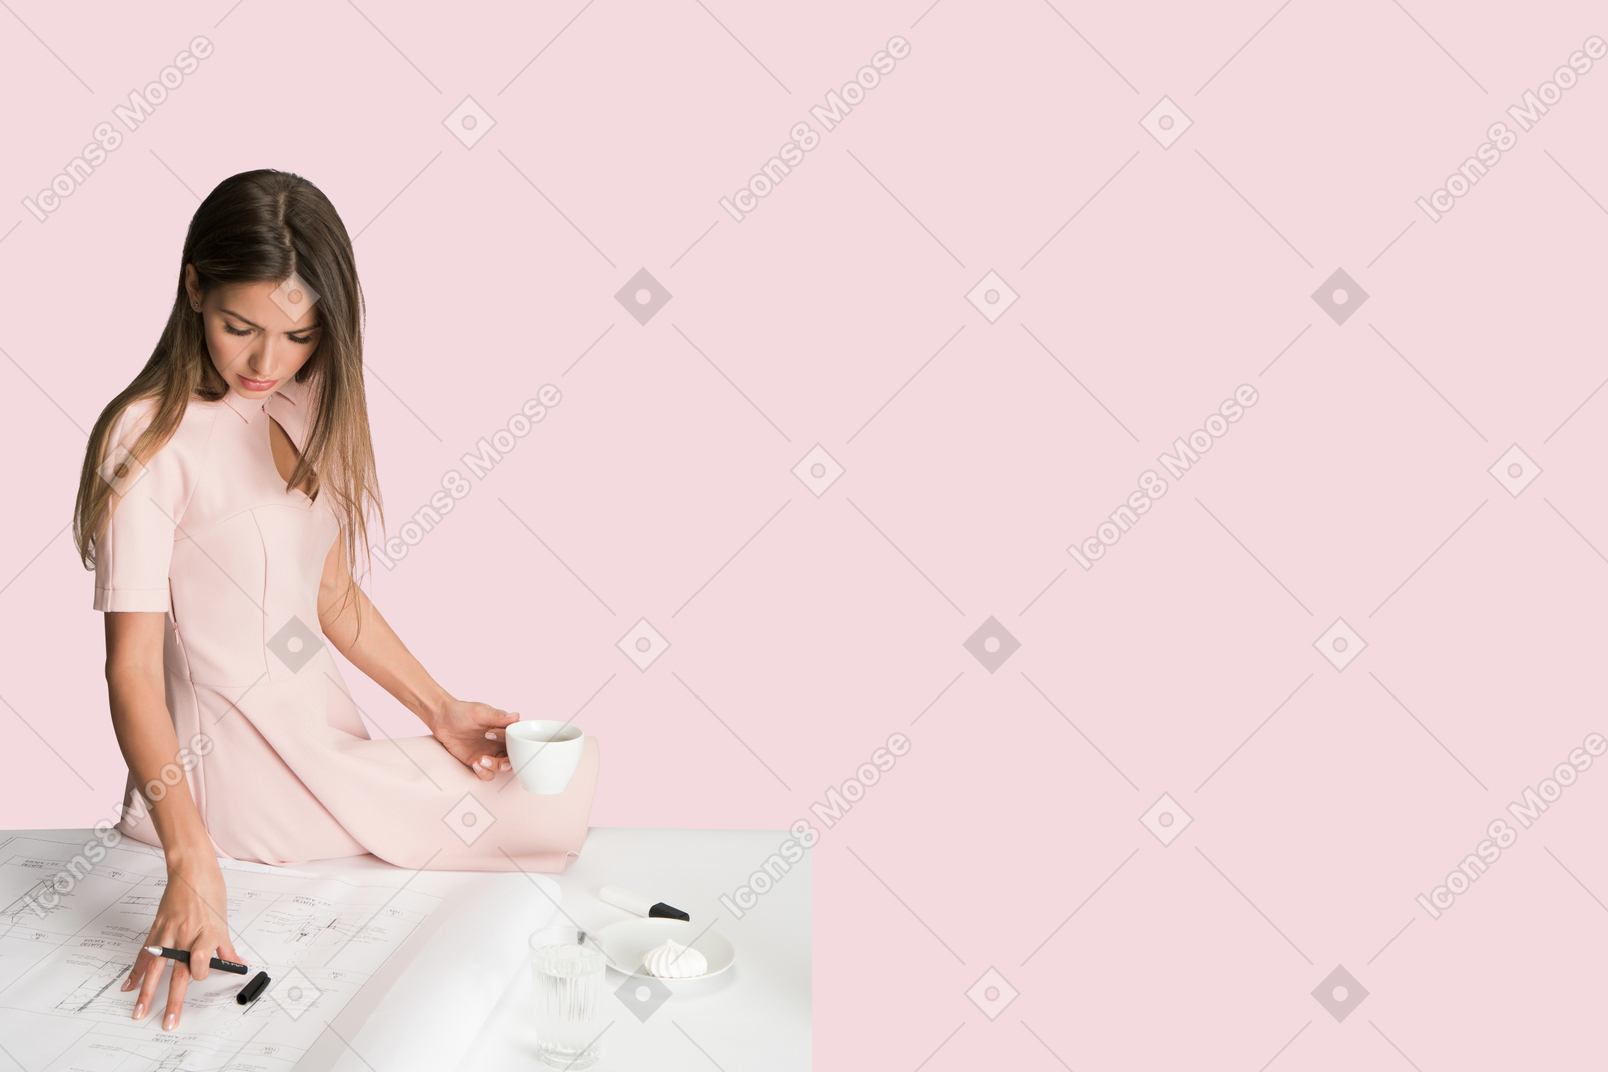 A woman in a pink dress sitting on a table with a cup of coffee